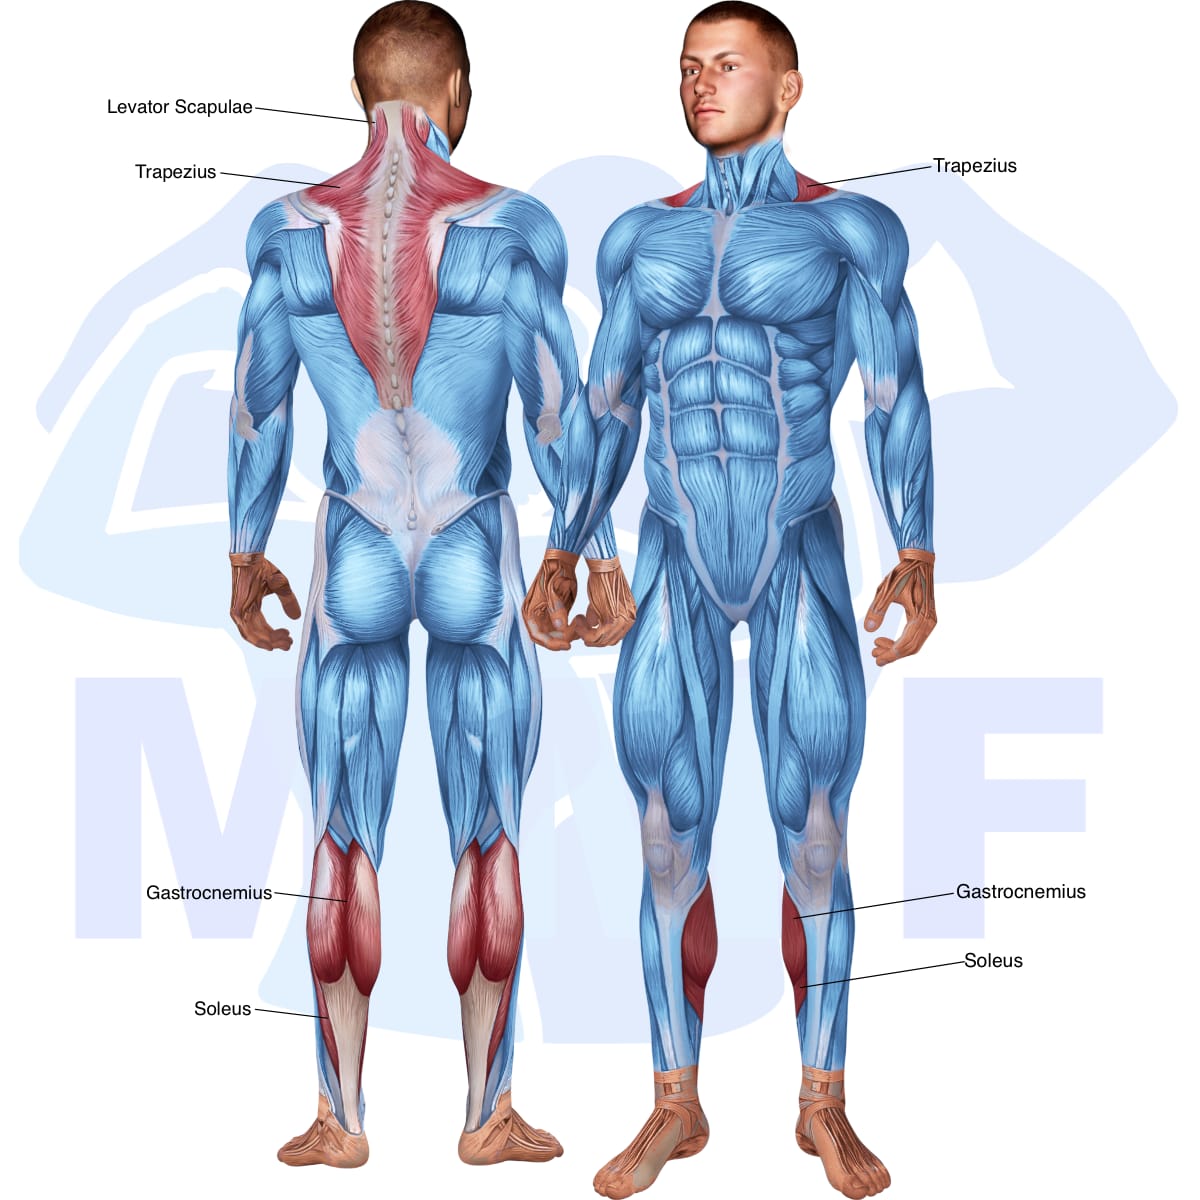 Image of the skeletal muscular system with the muscles used in the band calf raises exercise highlighted in red and the rest in blue.